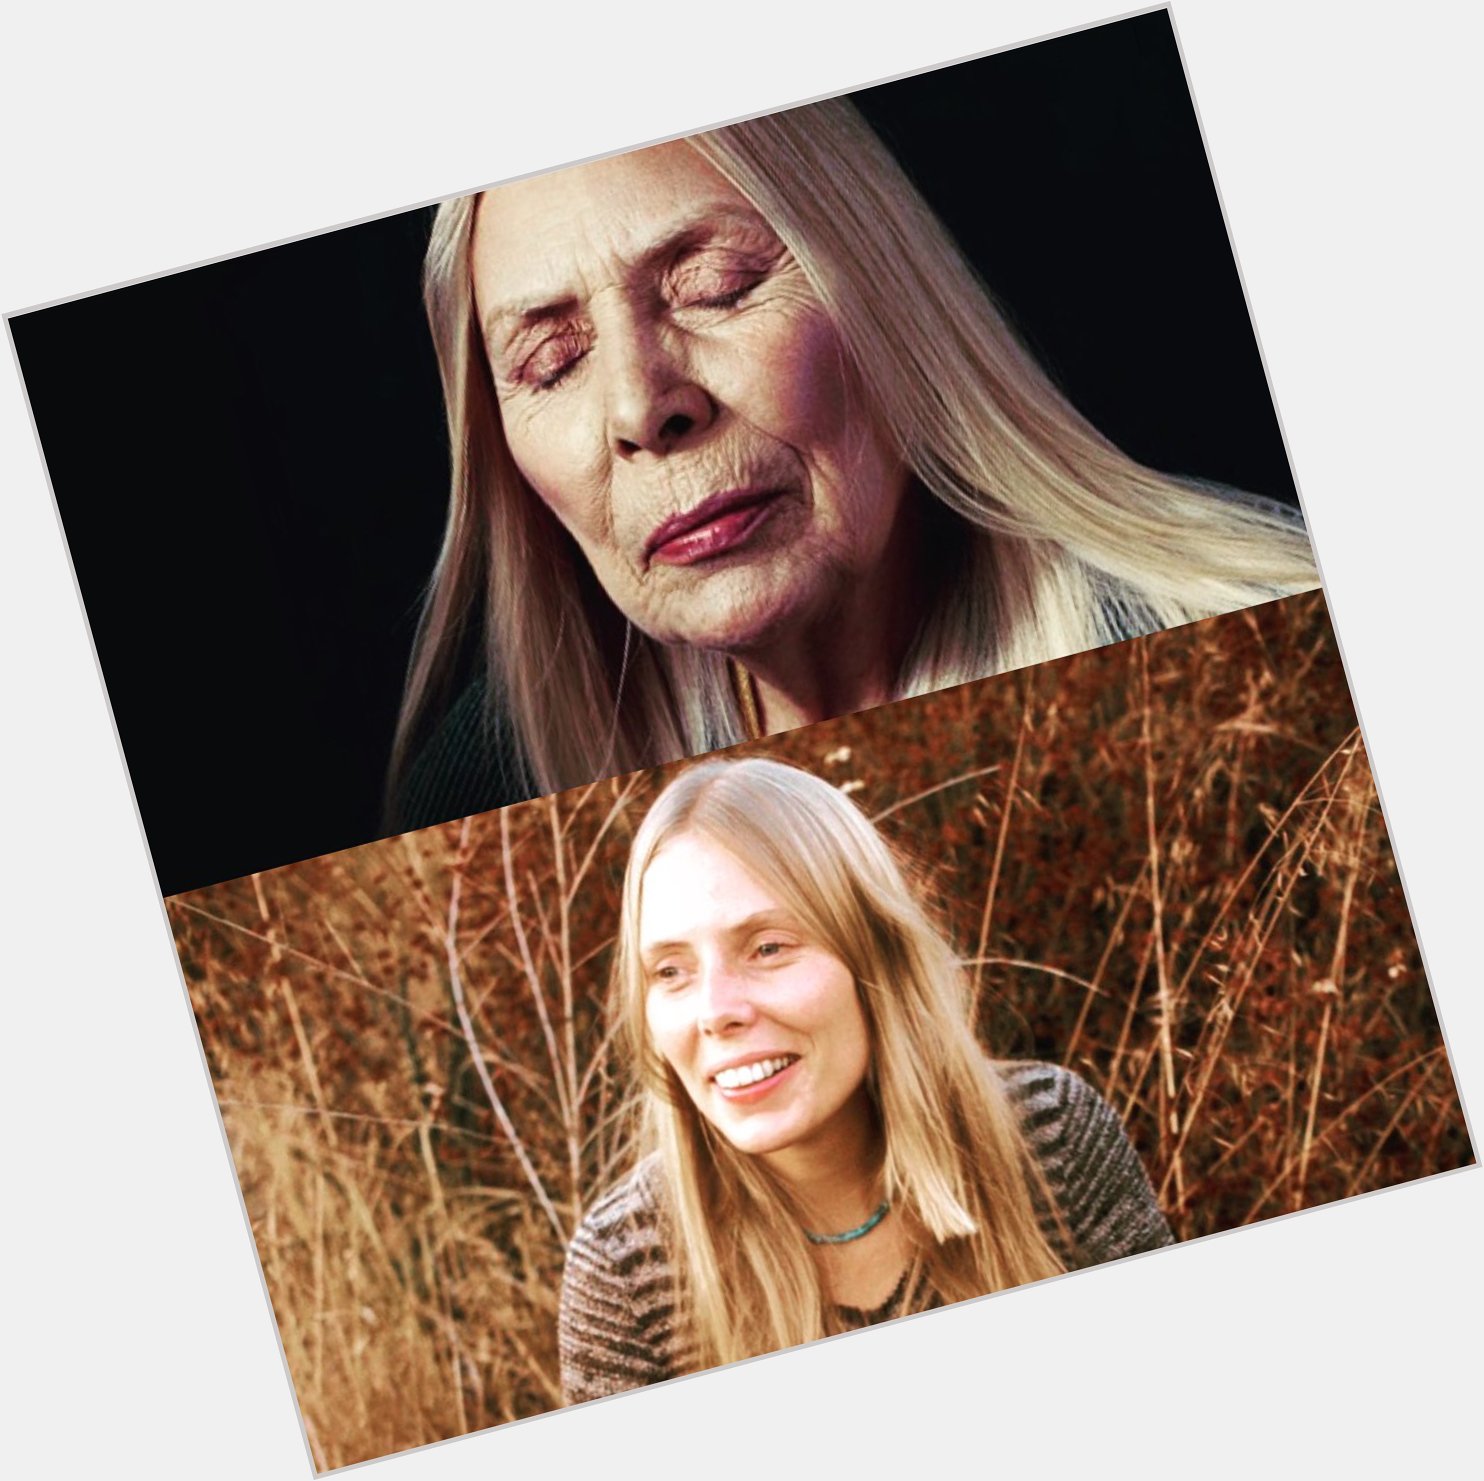  I learned a woman is never an old woman. -Joni Mitchell
Happy Birthday Goddess  